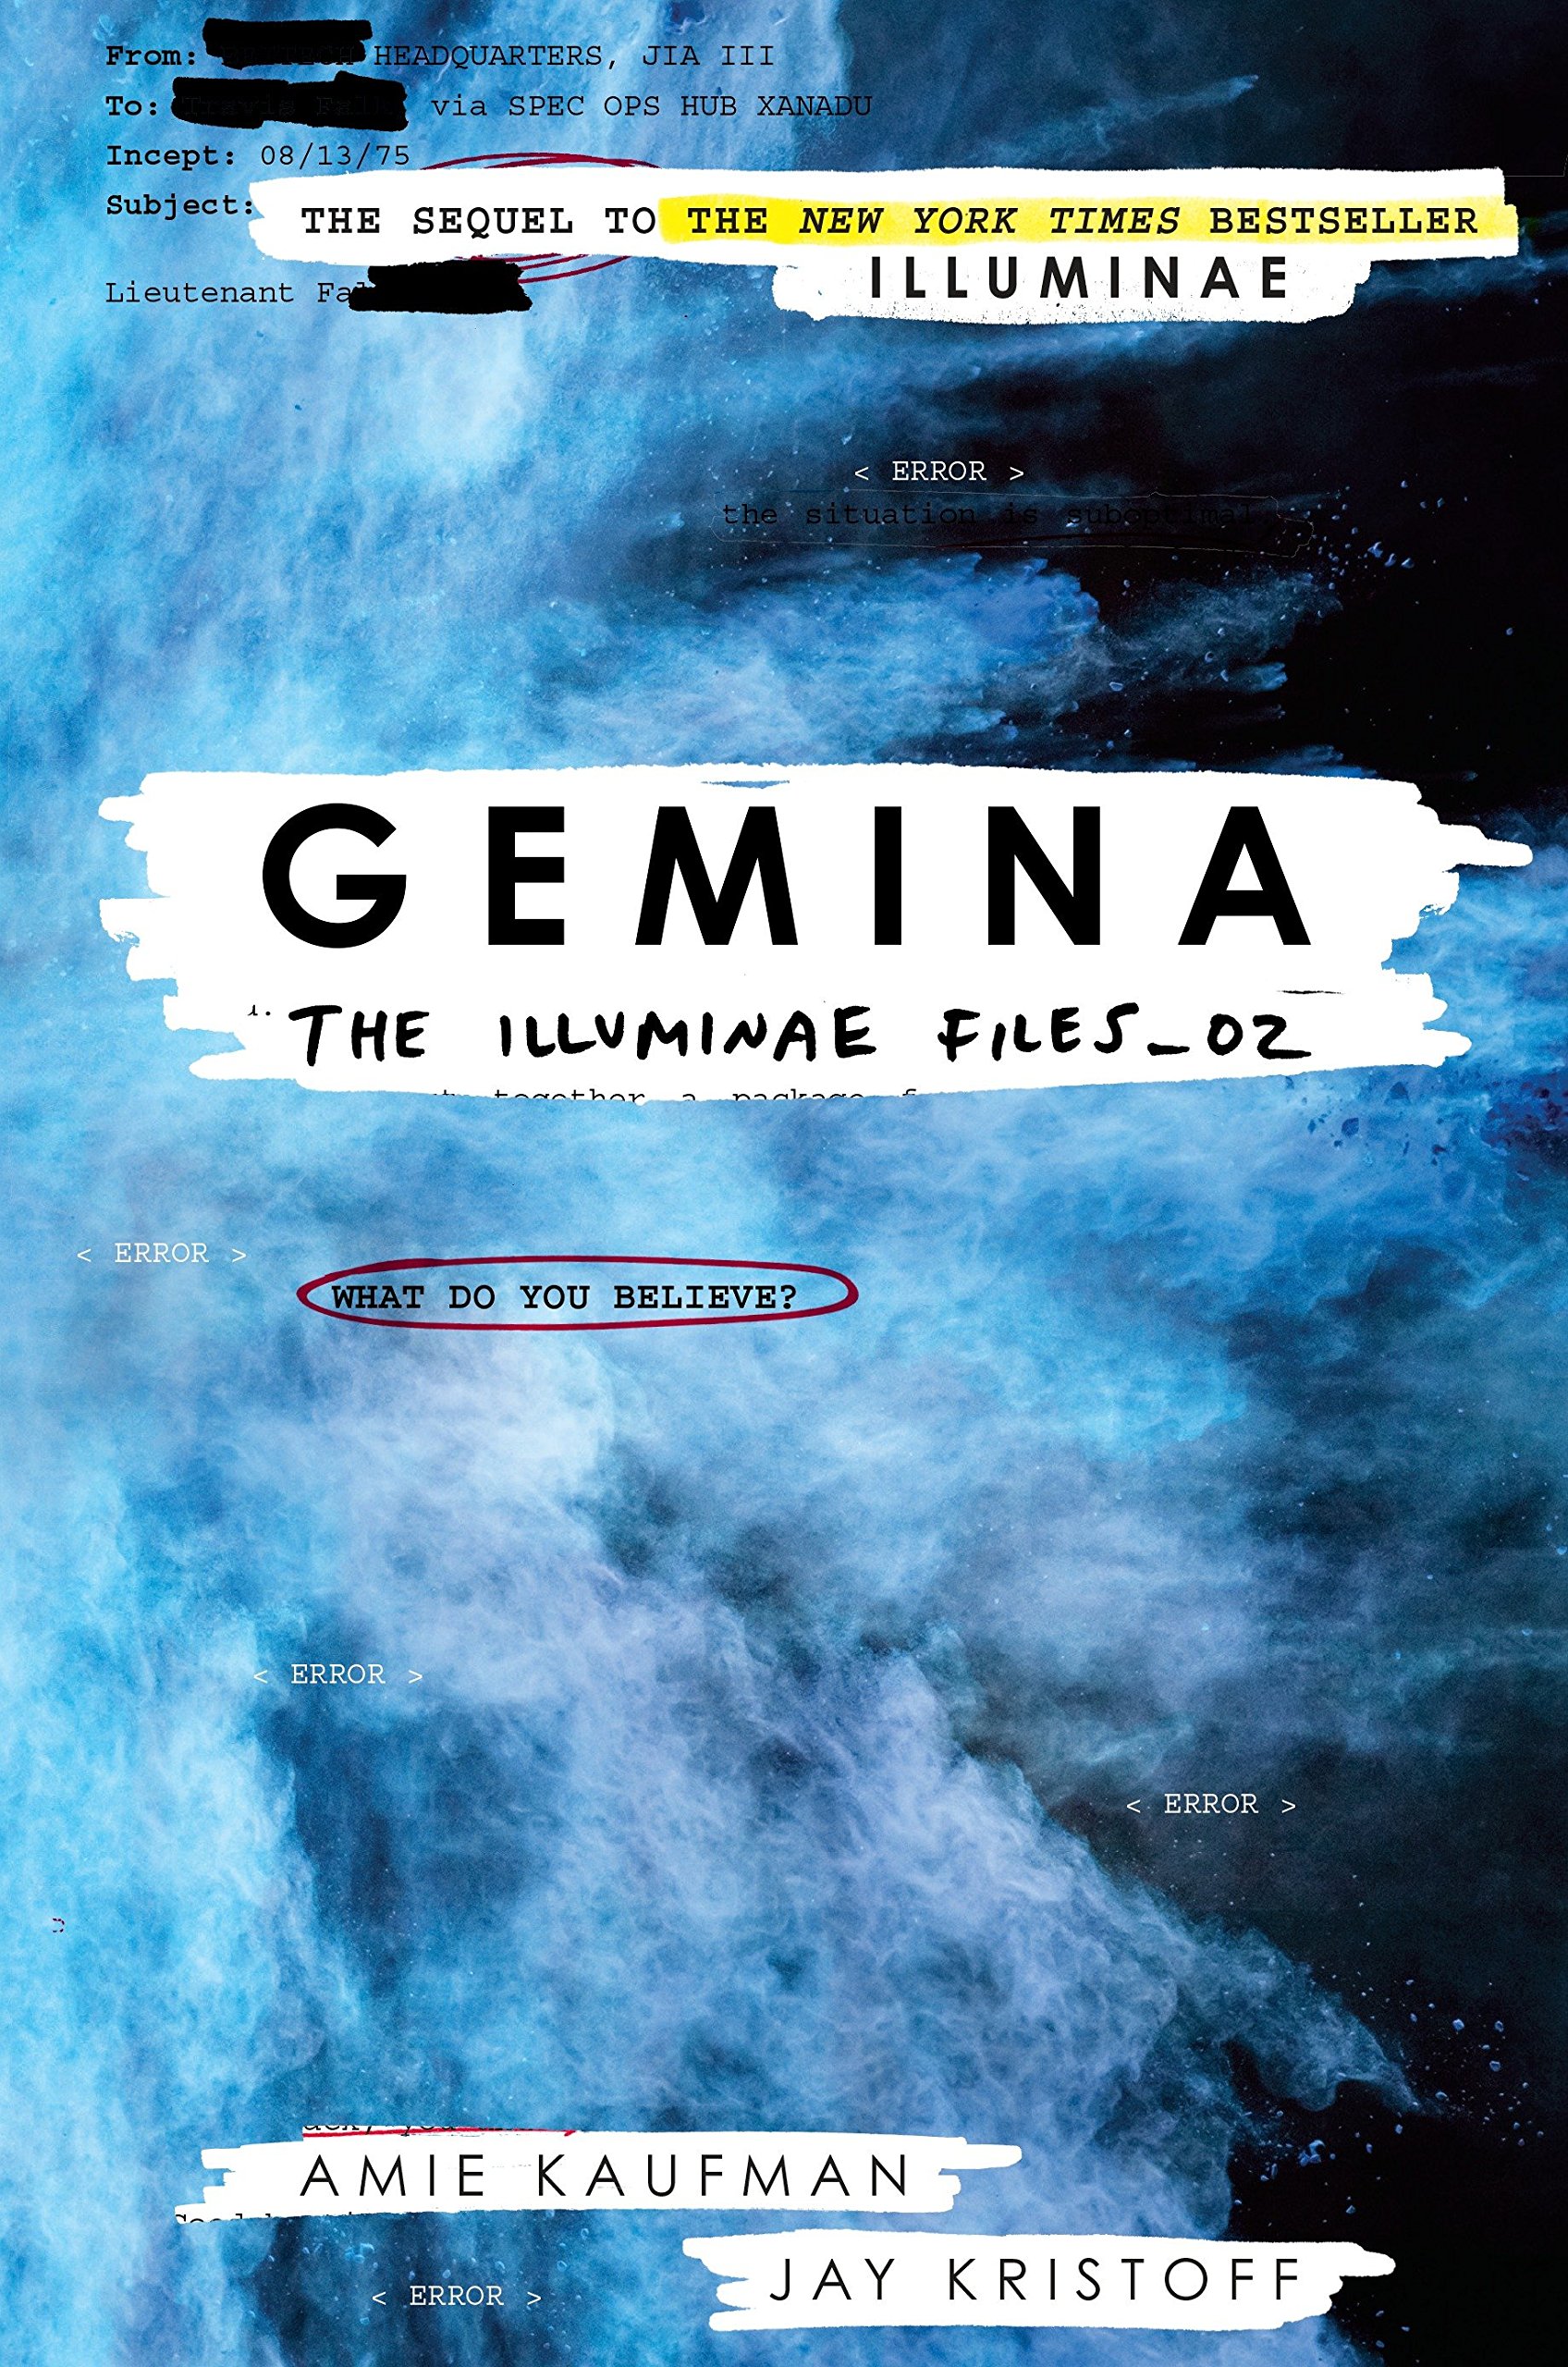 book cover for Gemina by Amie Kaufman and Jay Kristoff